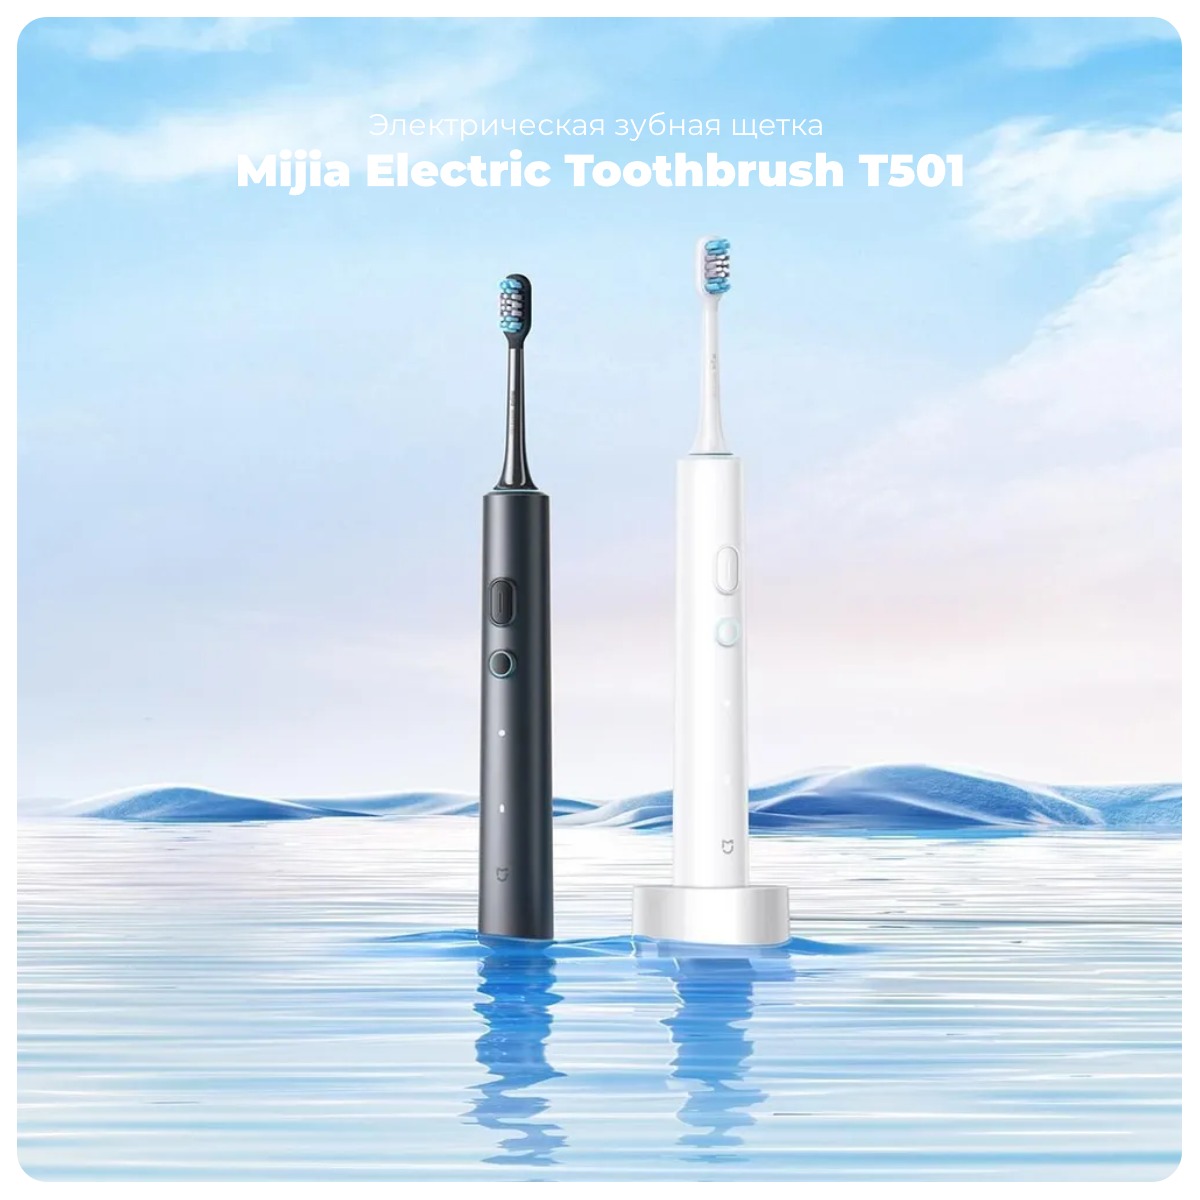 Mijia-Electric-Toothbrush-T501-01